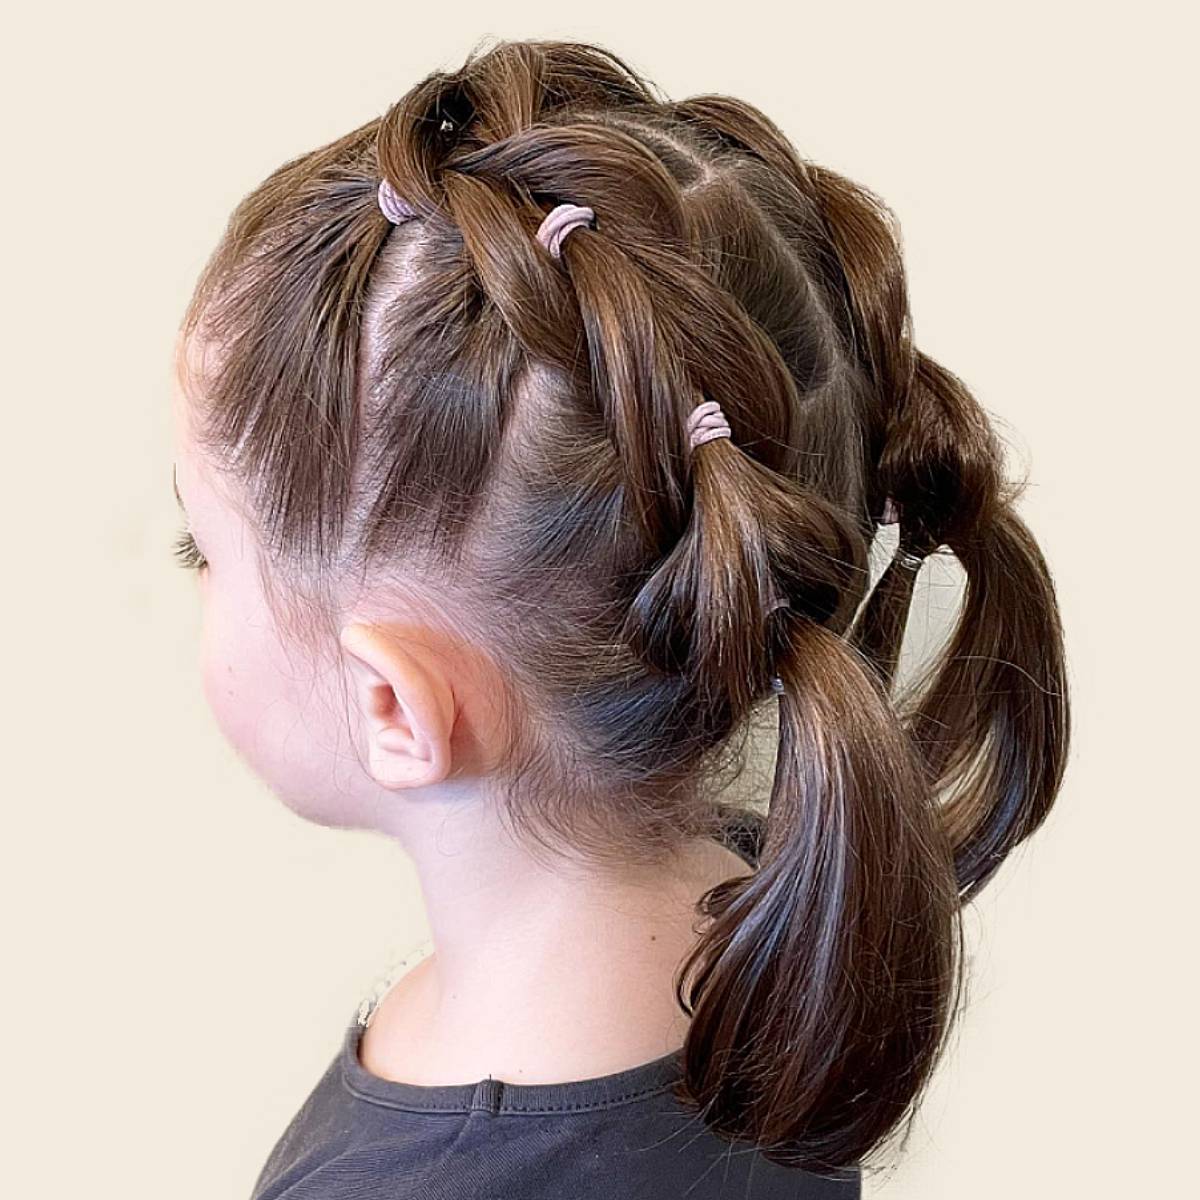 Hairstyles with girls | PPT